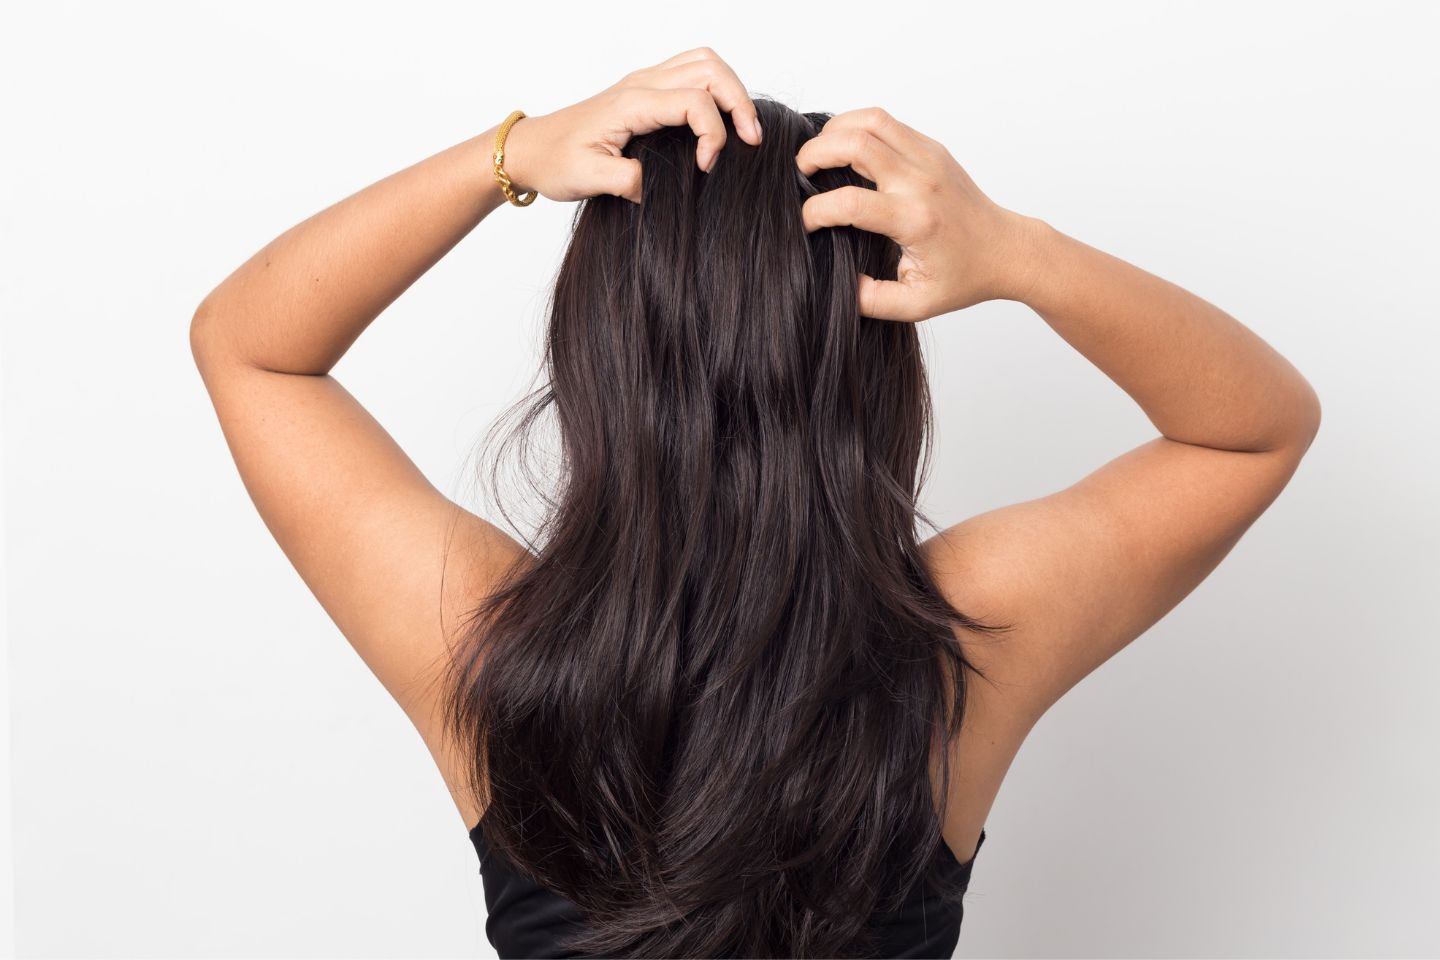 A woman with long hair undergoing hair restoration.